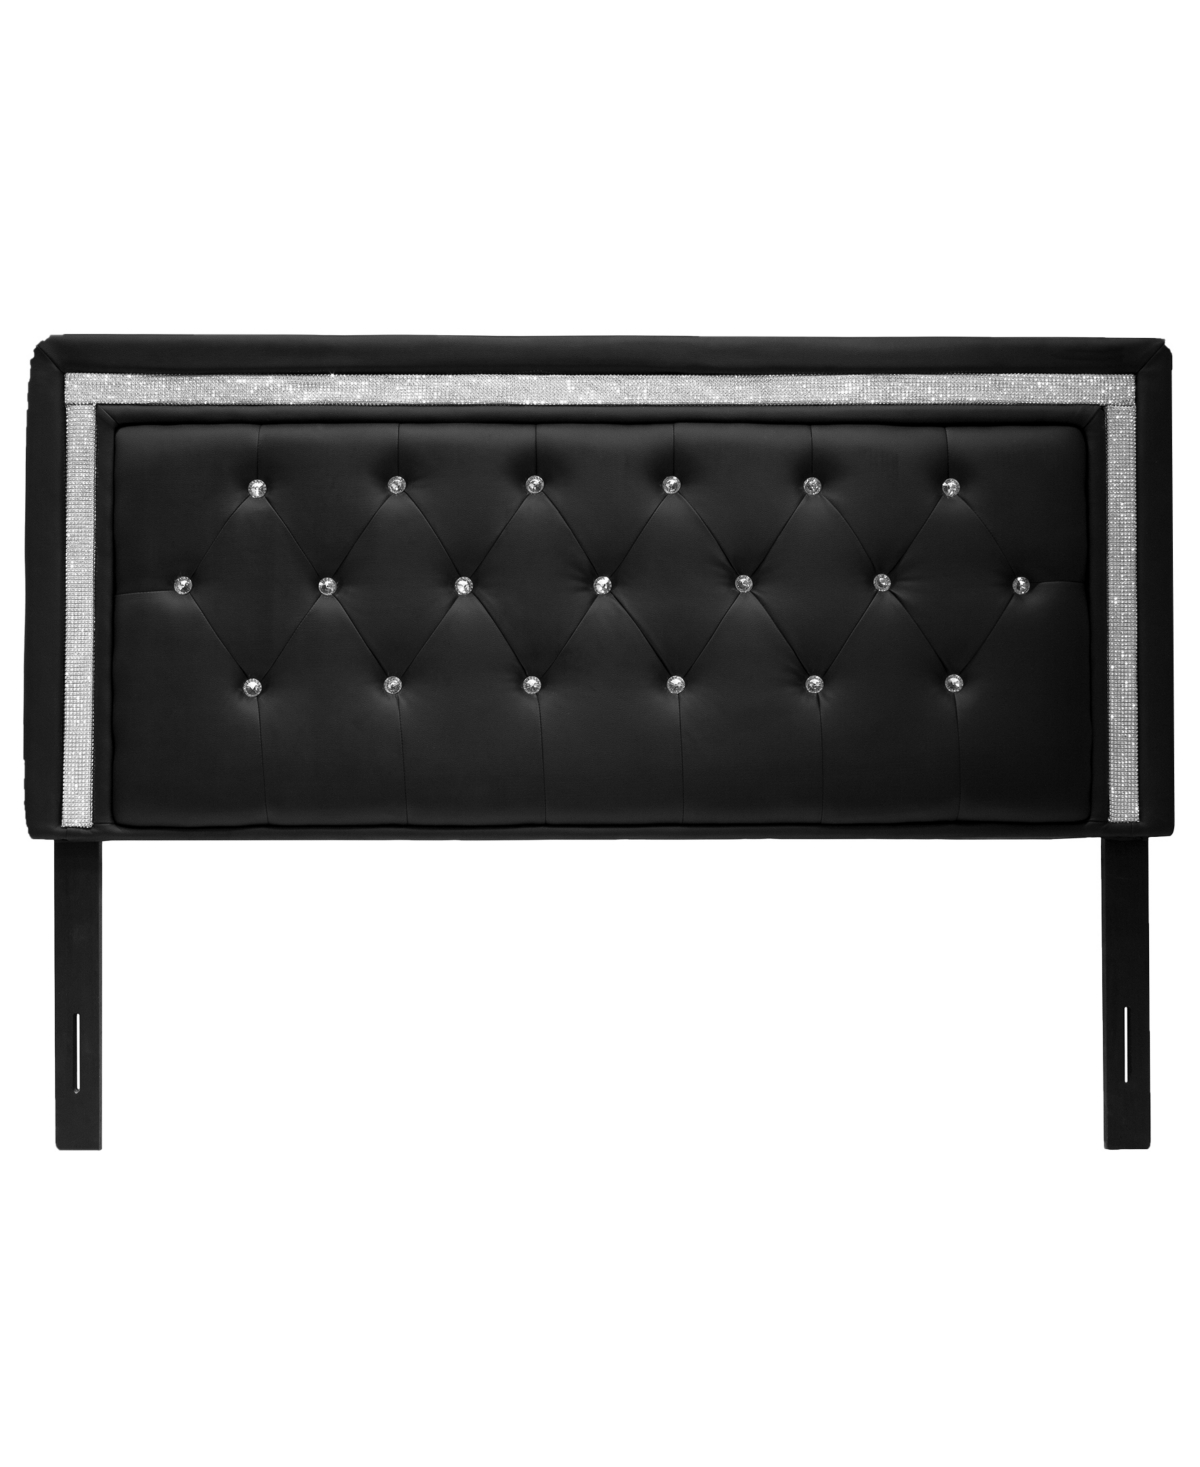 12857230 Maria Faux Leather Upholstered Headboard Tufted Cr sku 12857230